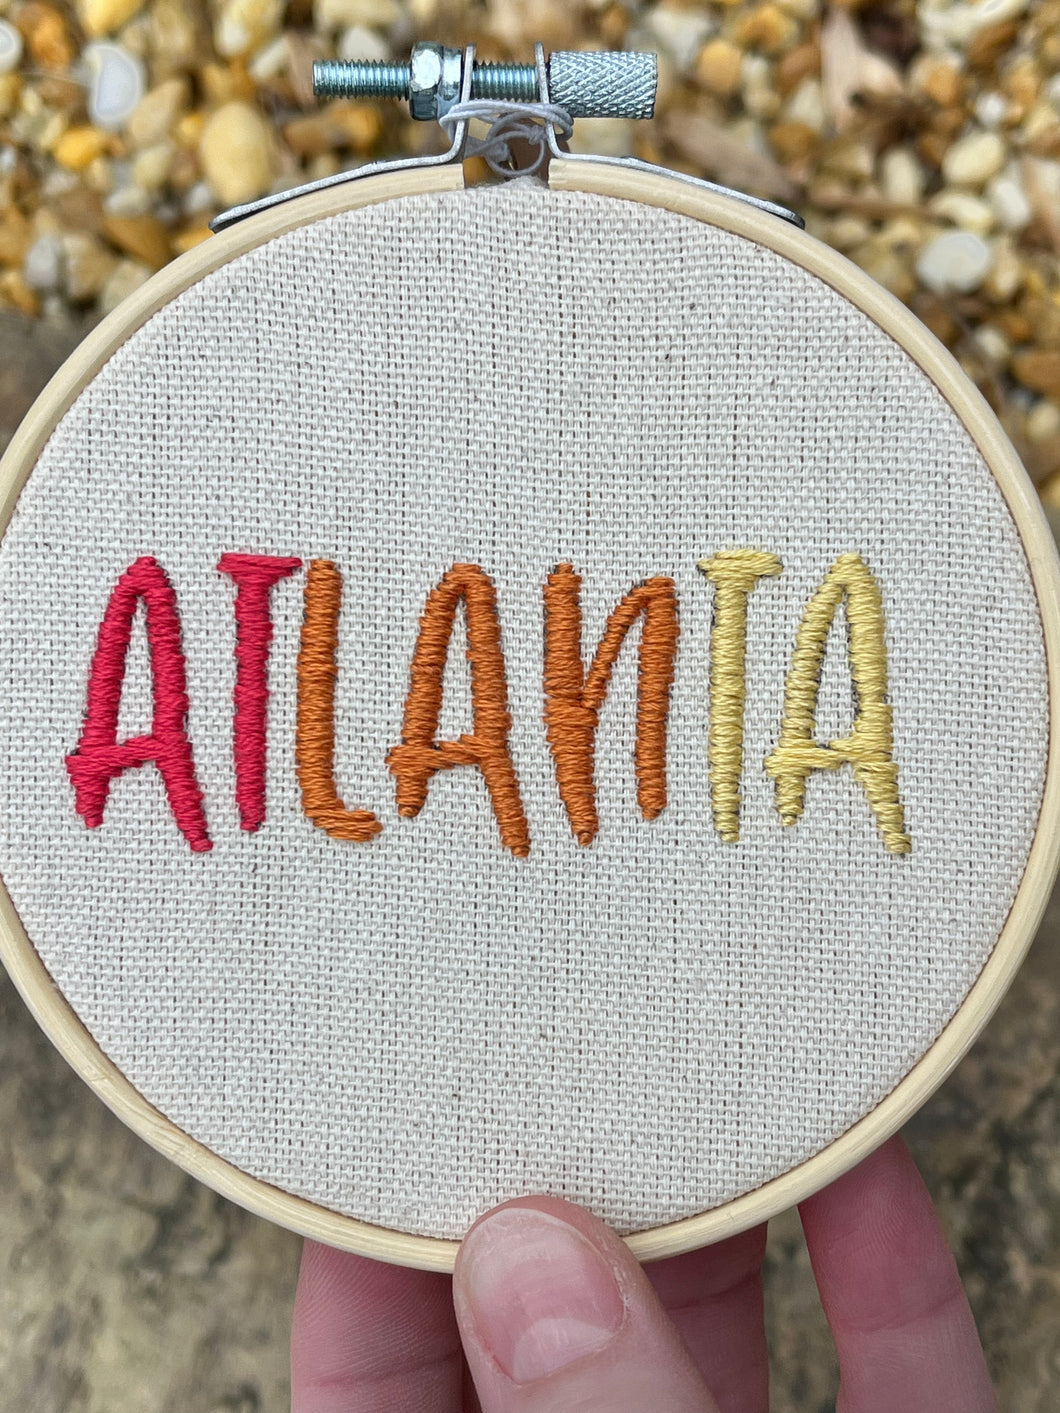 4 Inch Atlanta Sunset Colors Hand-Embroidered Art Hoop